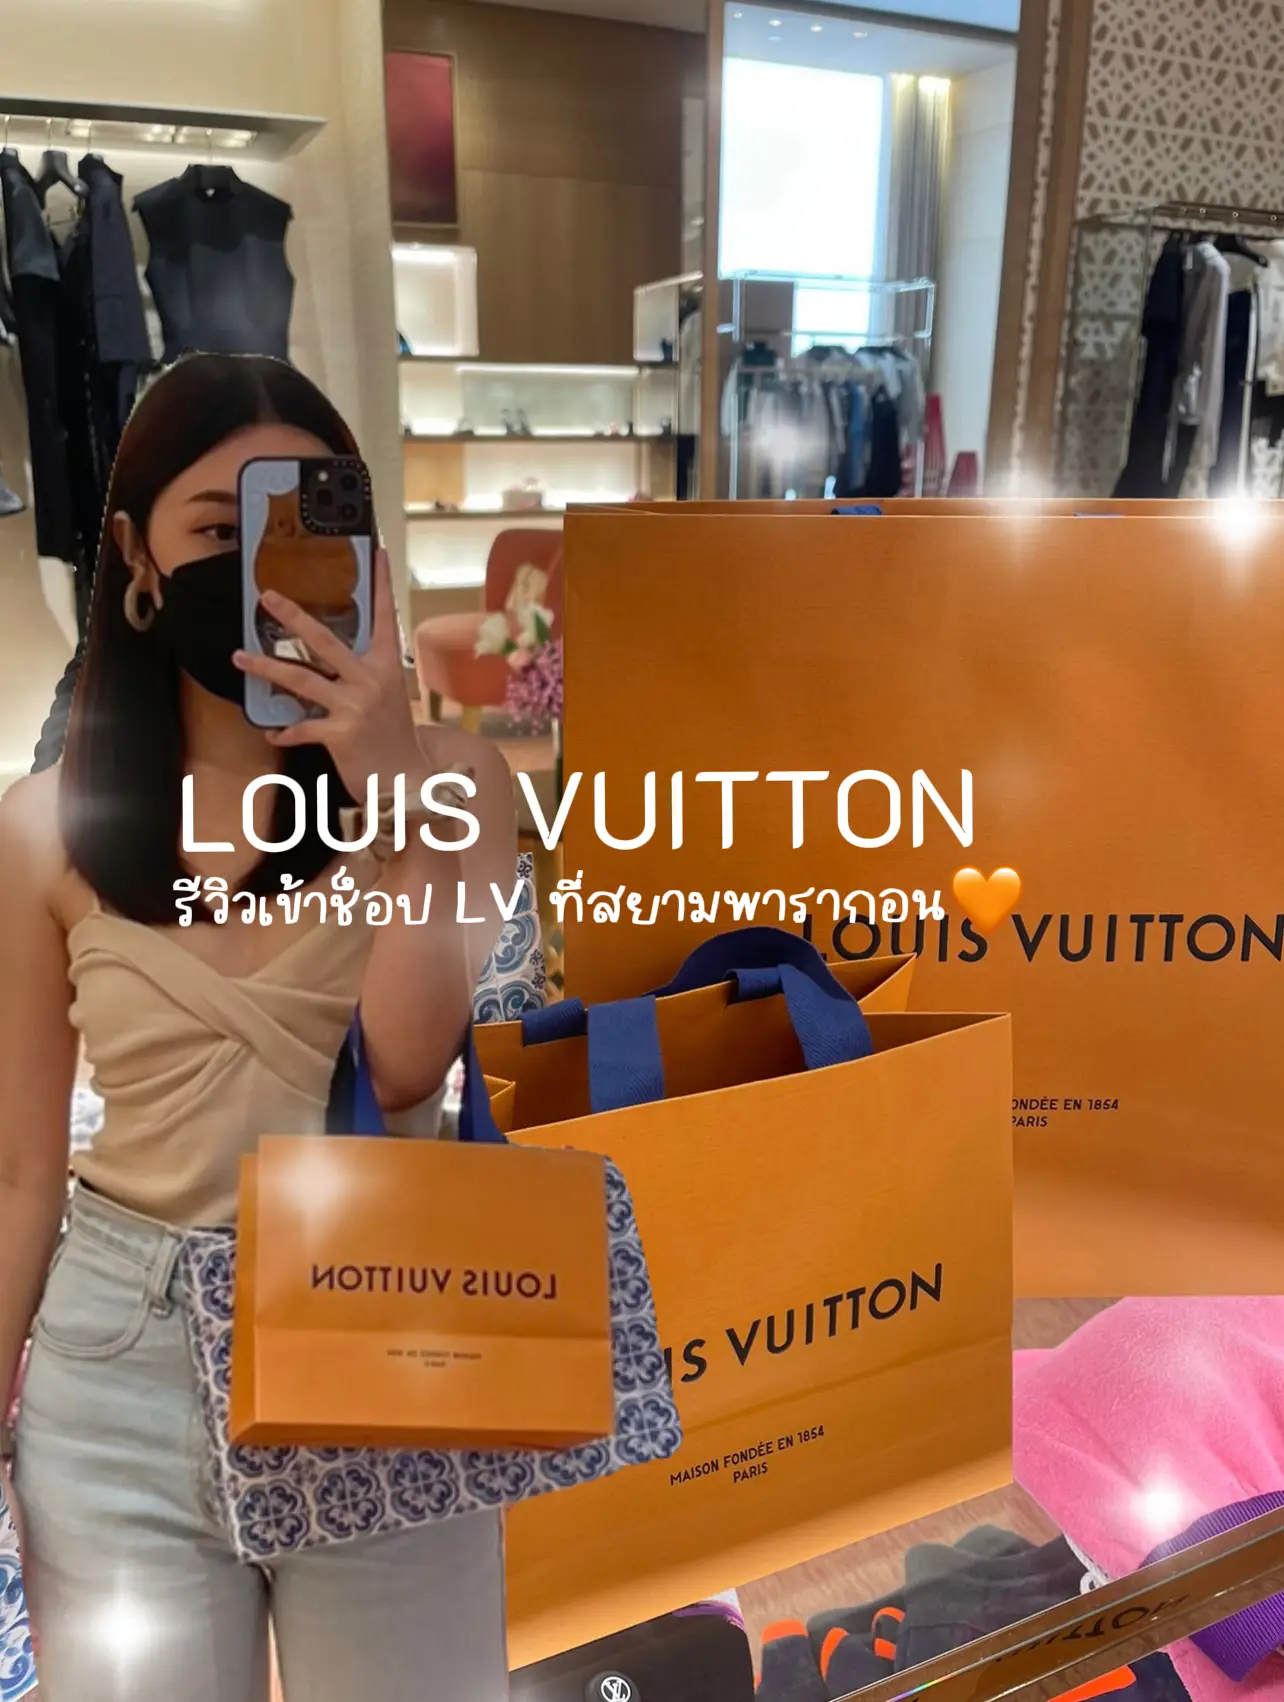 I went into Louis Vuitton today and my usual SA gifted me all